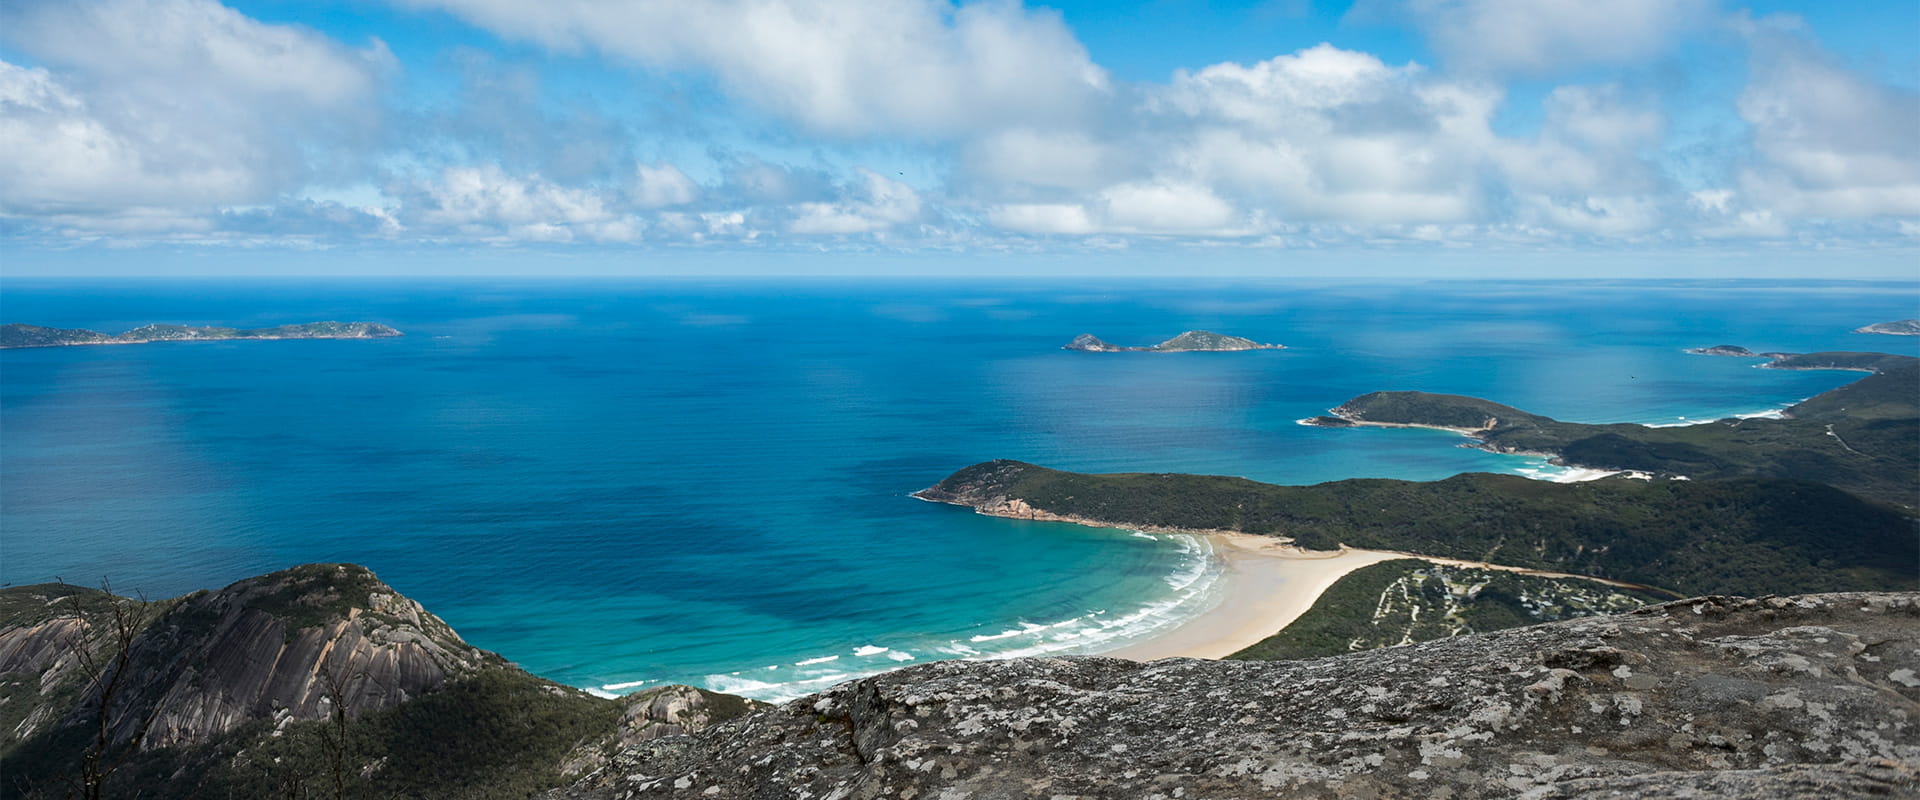 View of the water and landscape from Mount Oberon at Wilsons Promontory National Park.